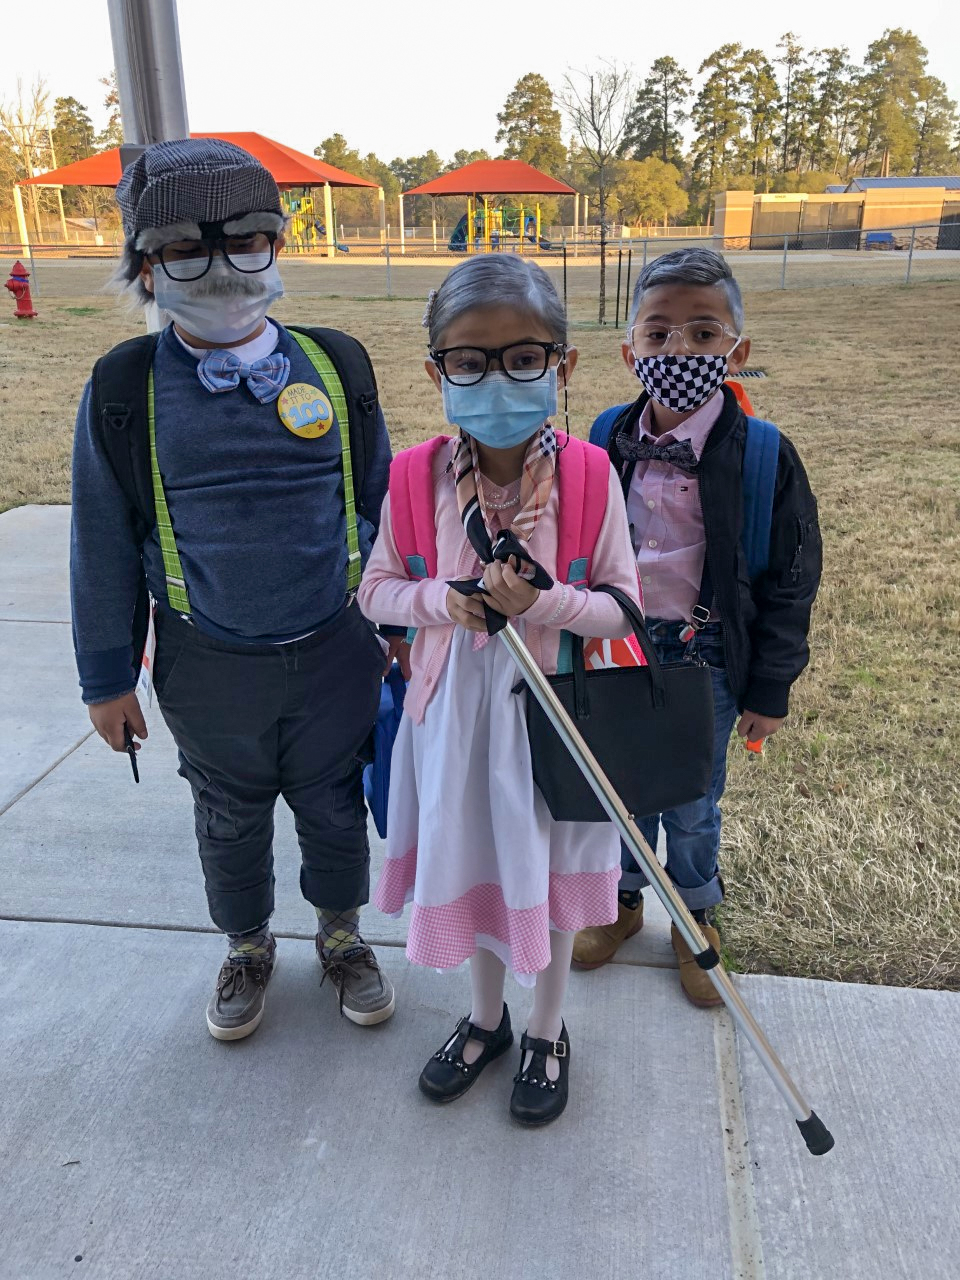 Students smile for the camera while dressed up for the 100th day of school